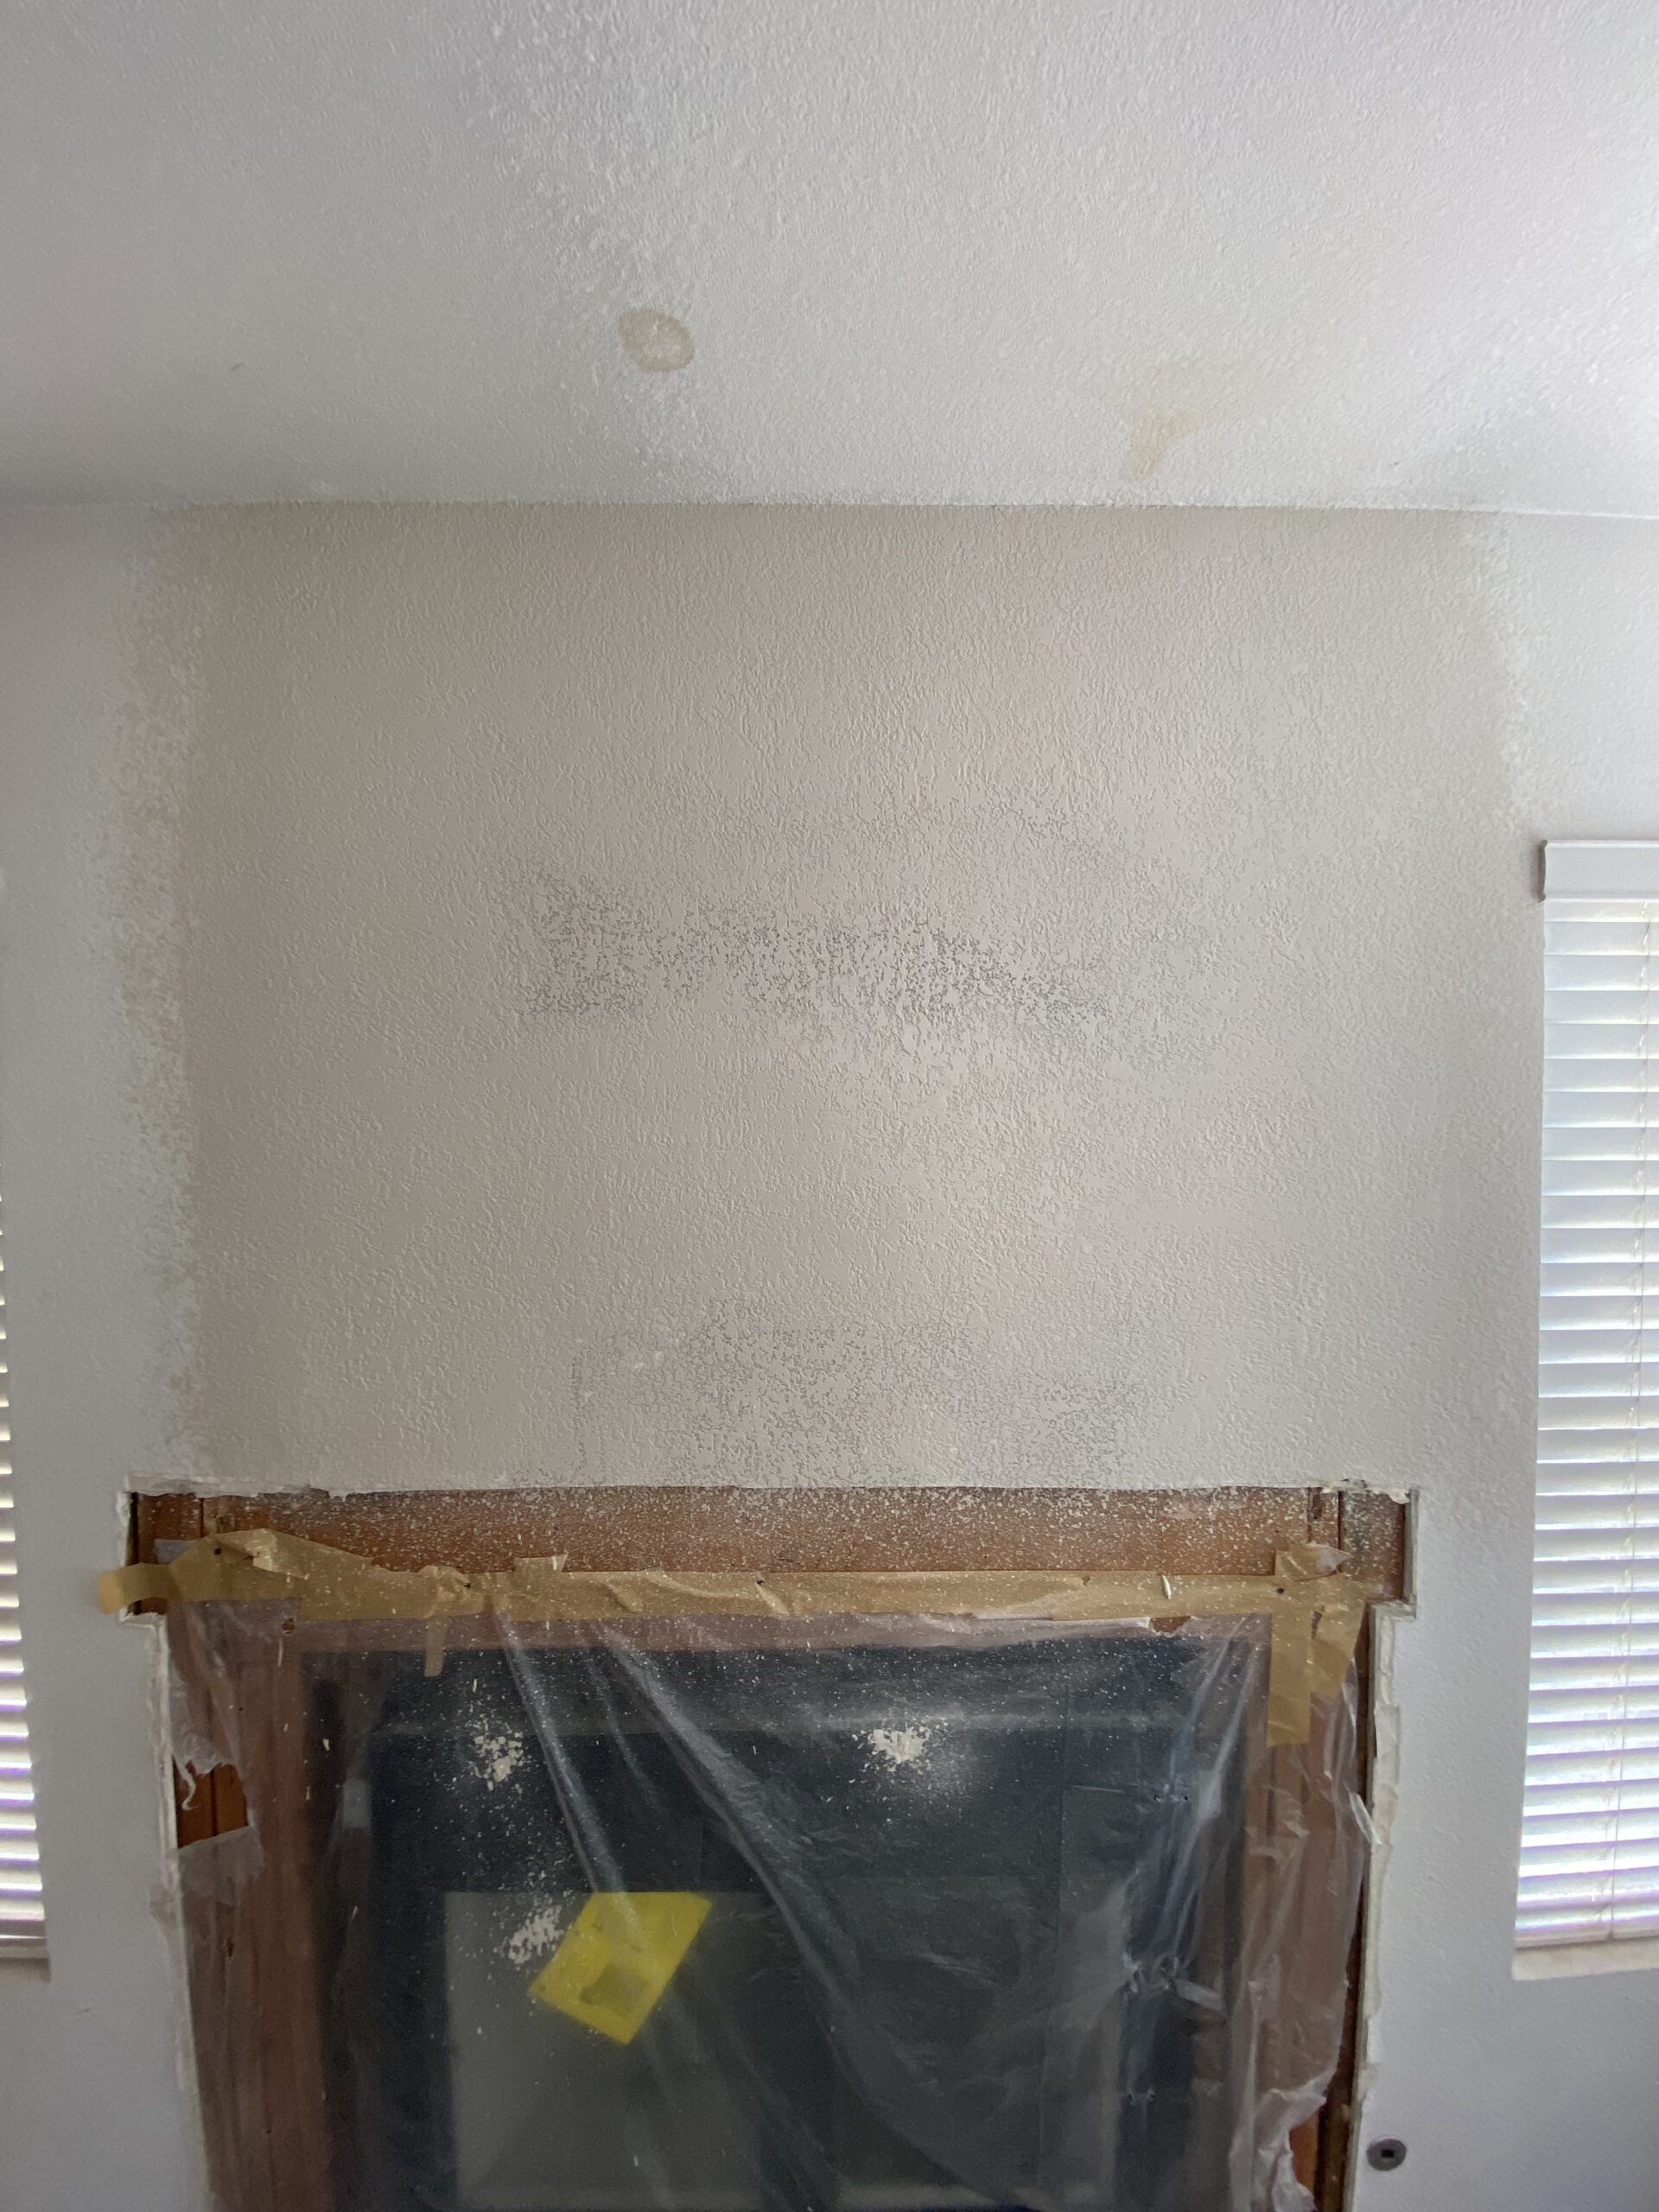 Fire place drywall repair after